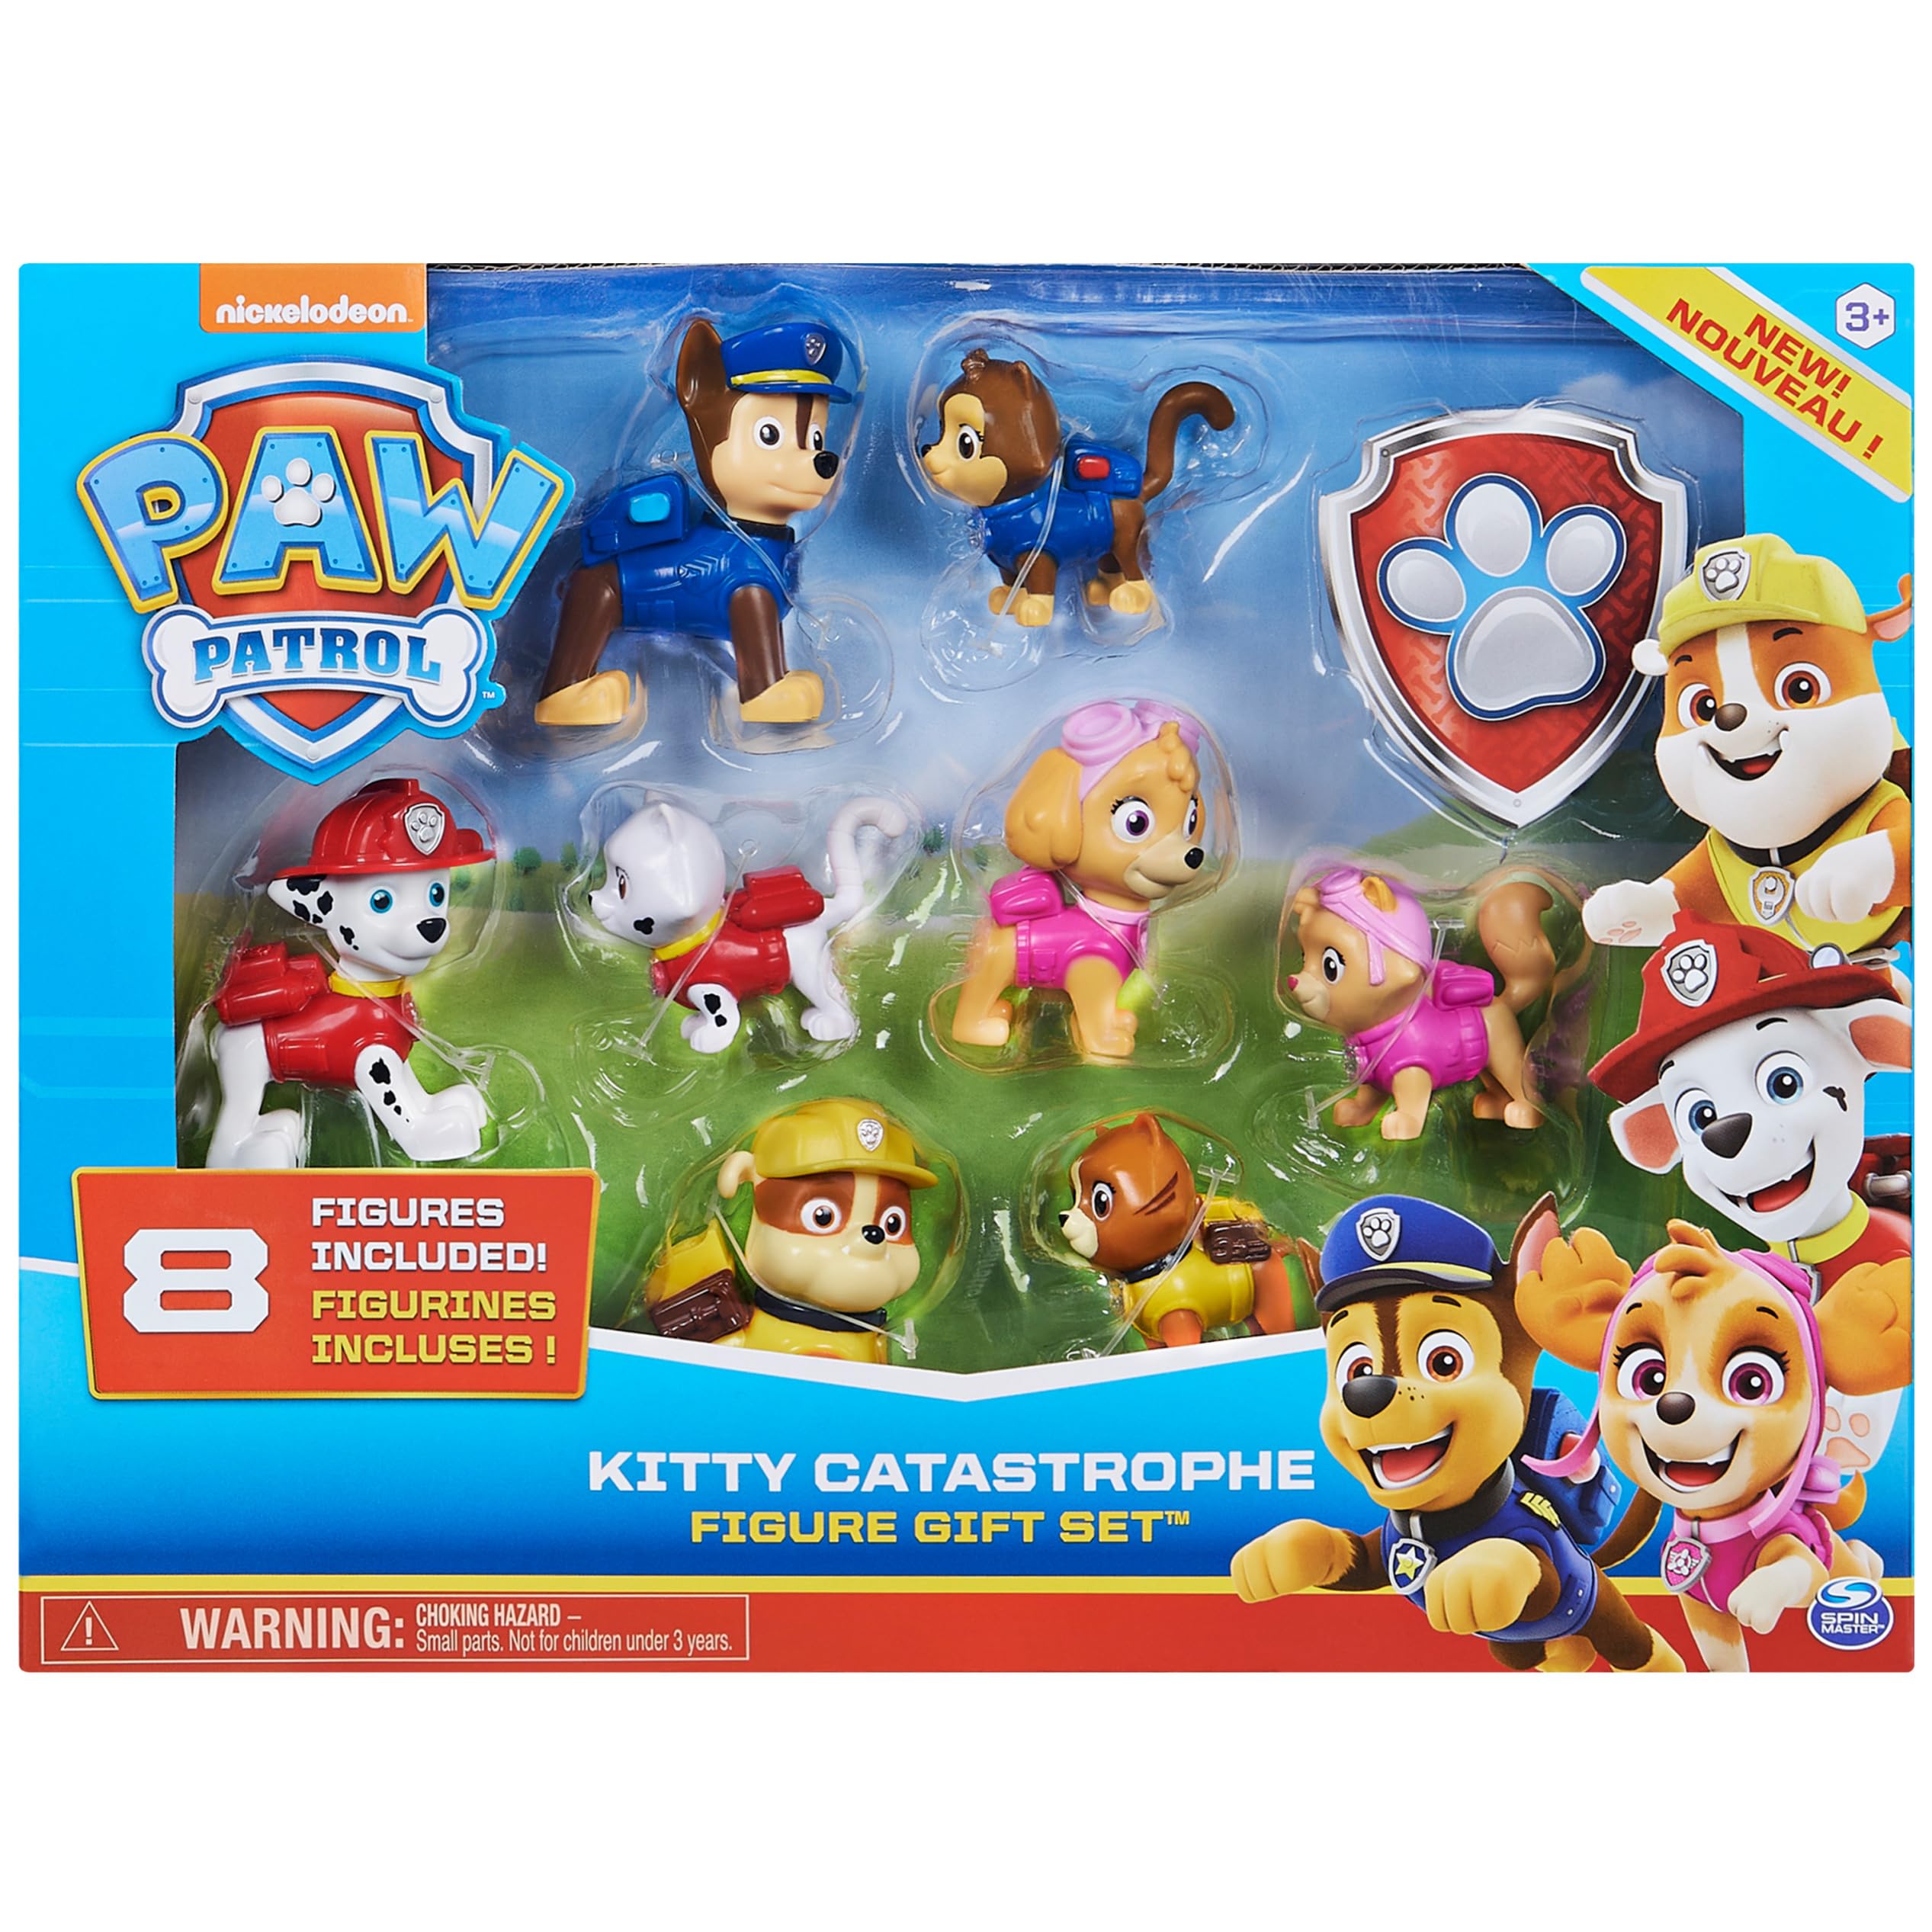 Paw Patrol, Kitty Catastrophe Gift Set with 8 Collectible Toy Figures, for Kids Aged 3 and Up